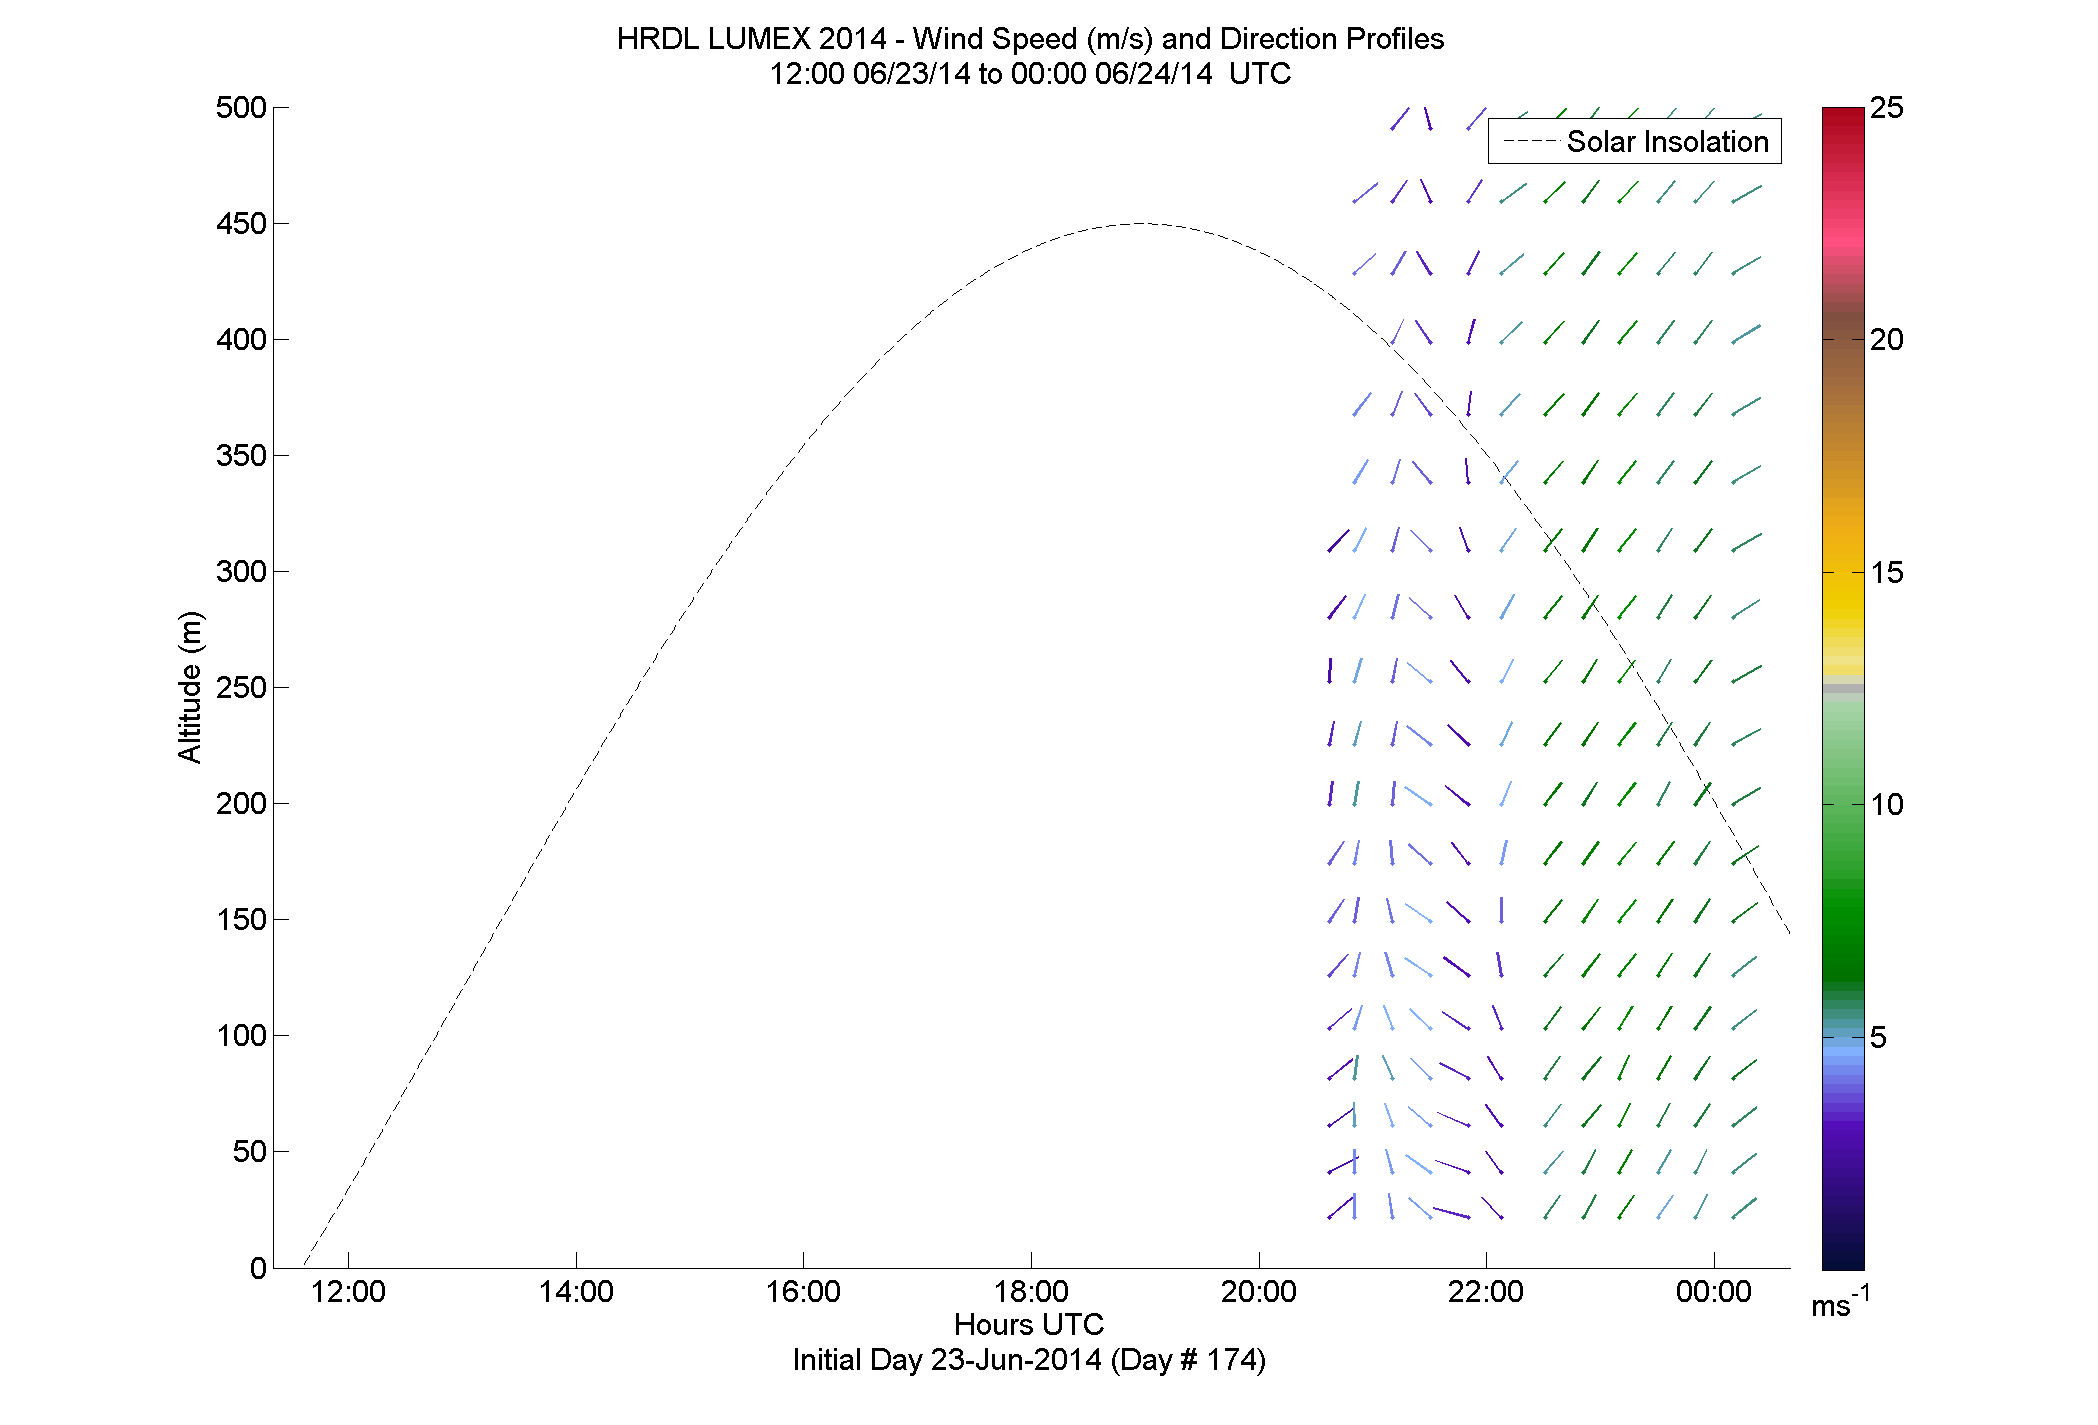 HRDL speed and direction profile - June 23 pm